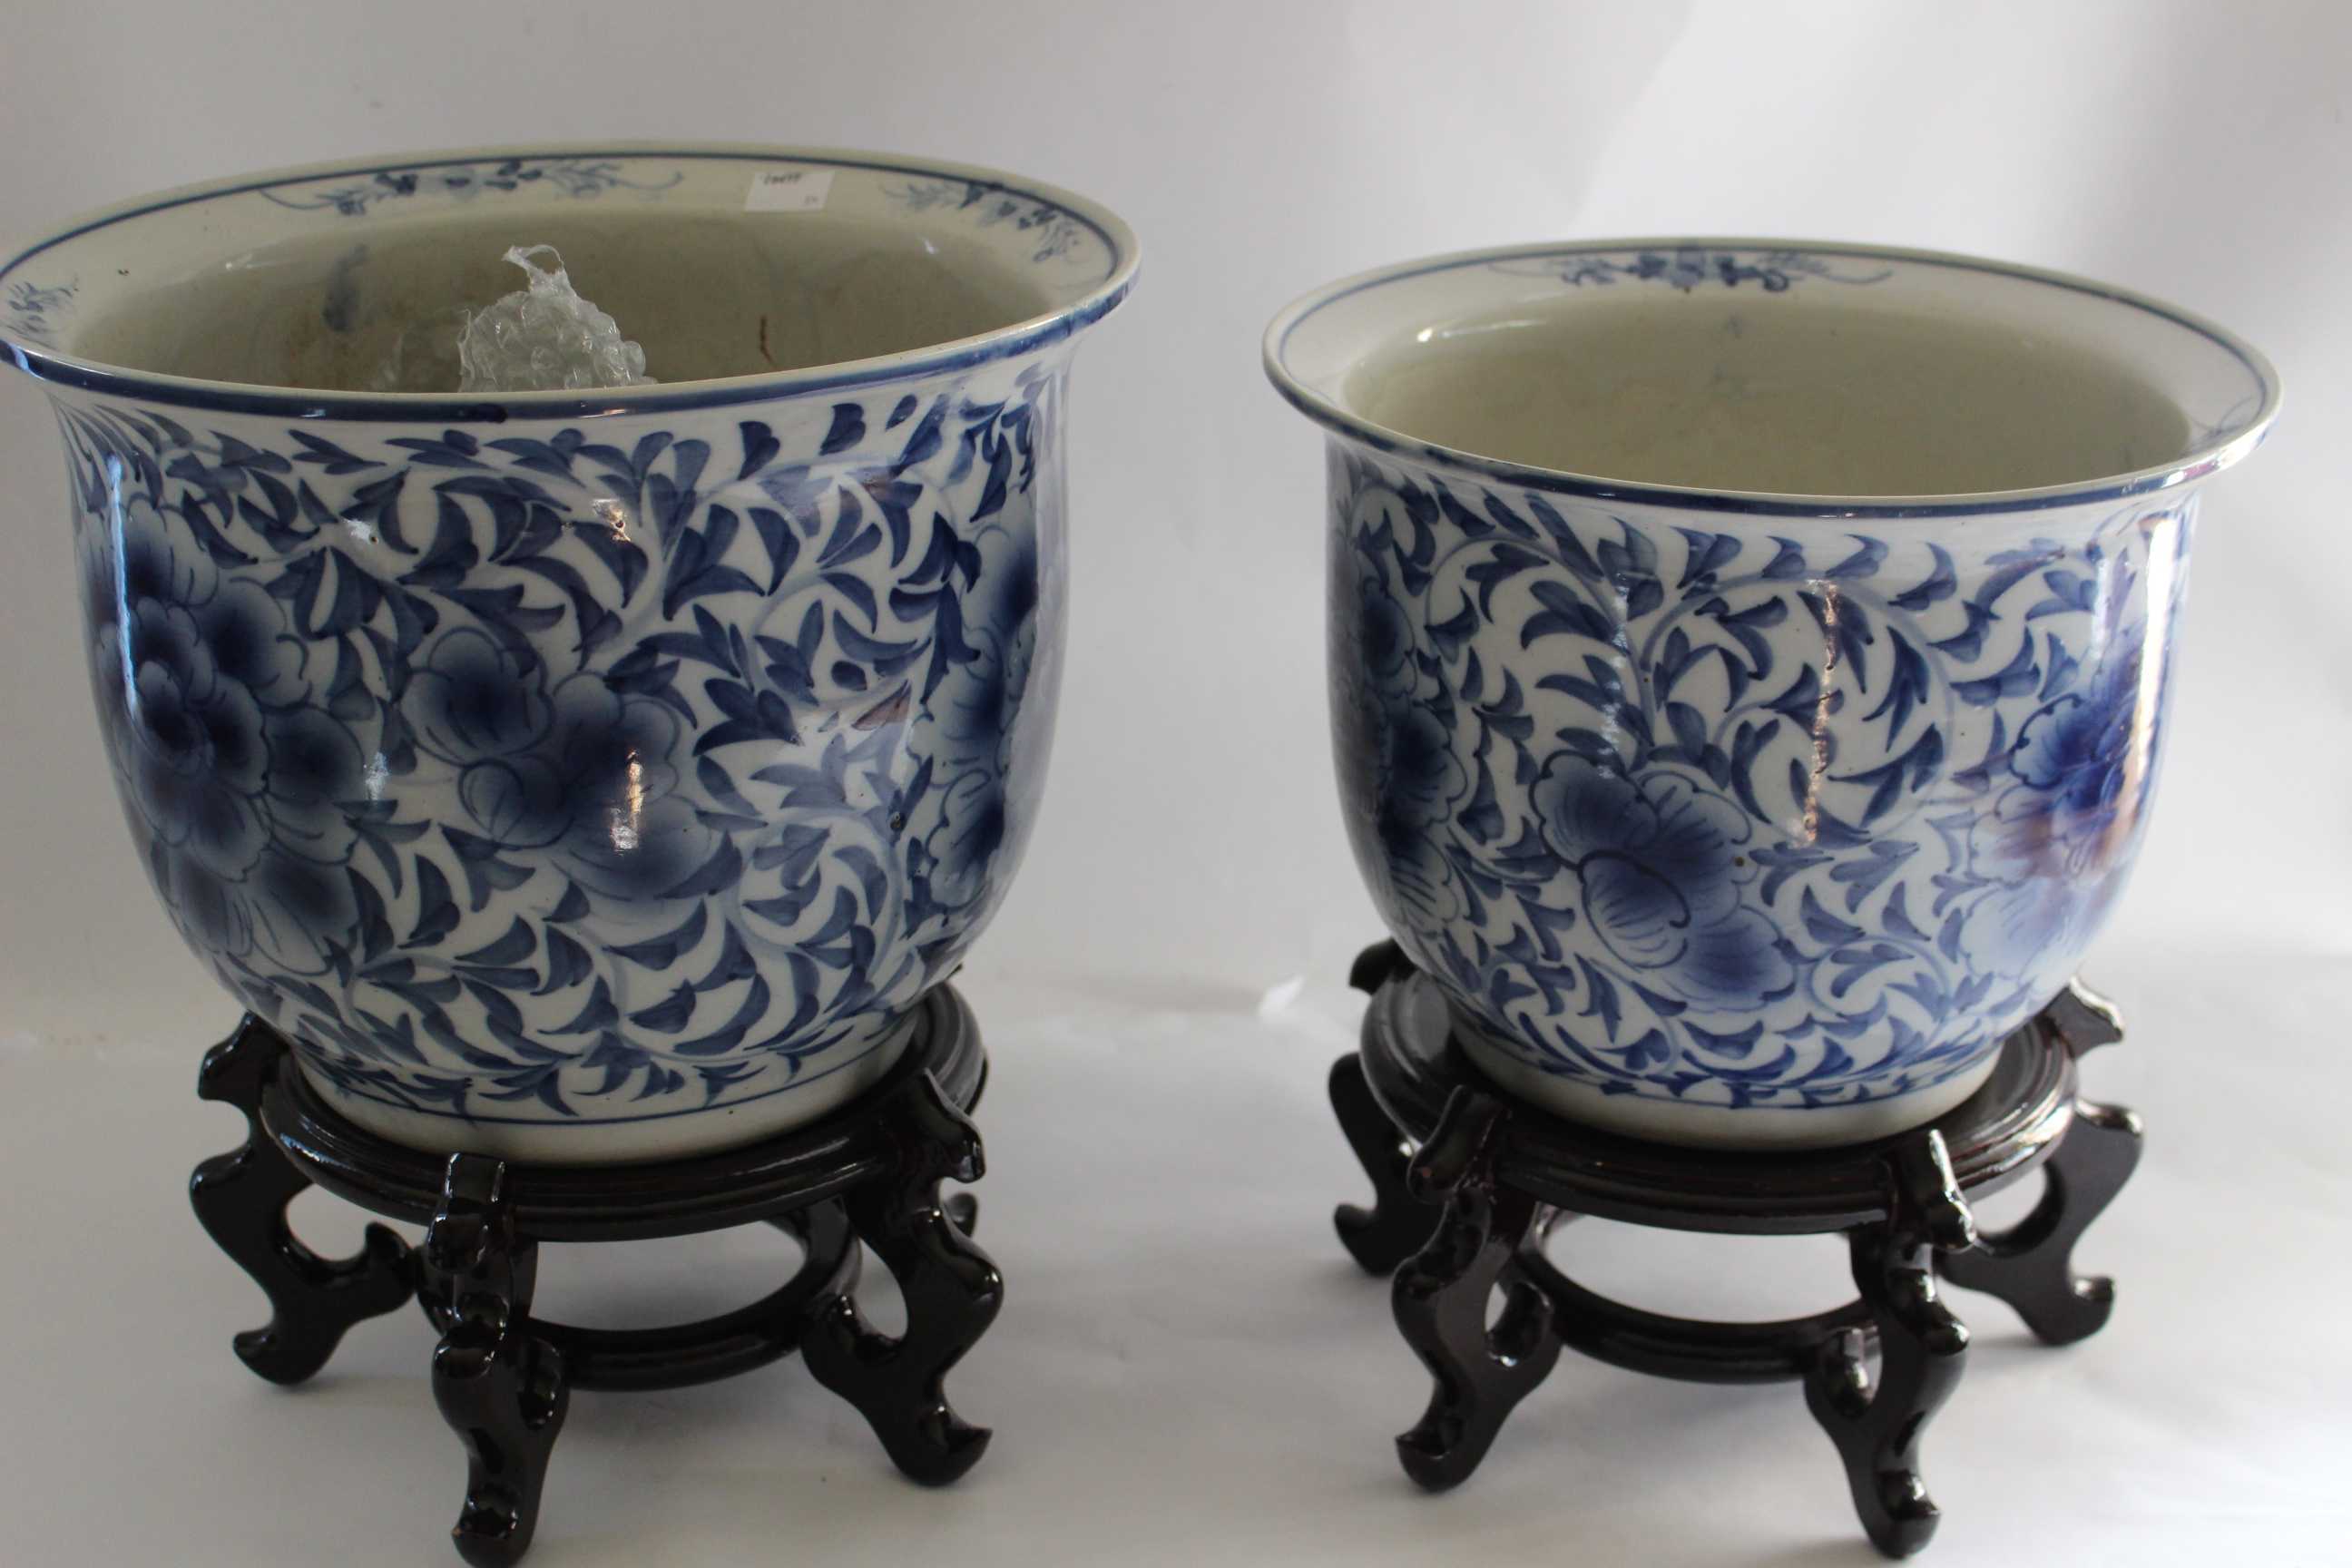 Two Chinese Hand painted Blue and White porcelain Jardinière and stand. Circa 1900.